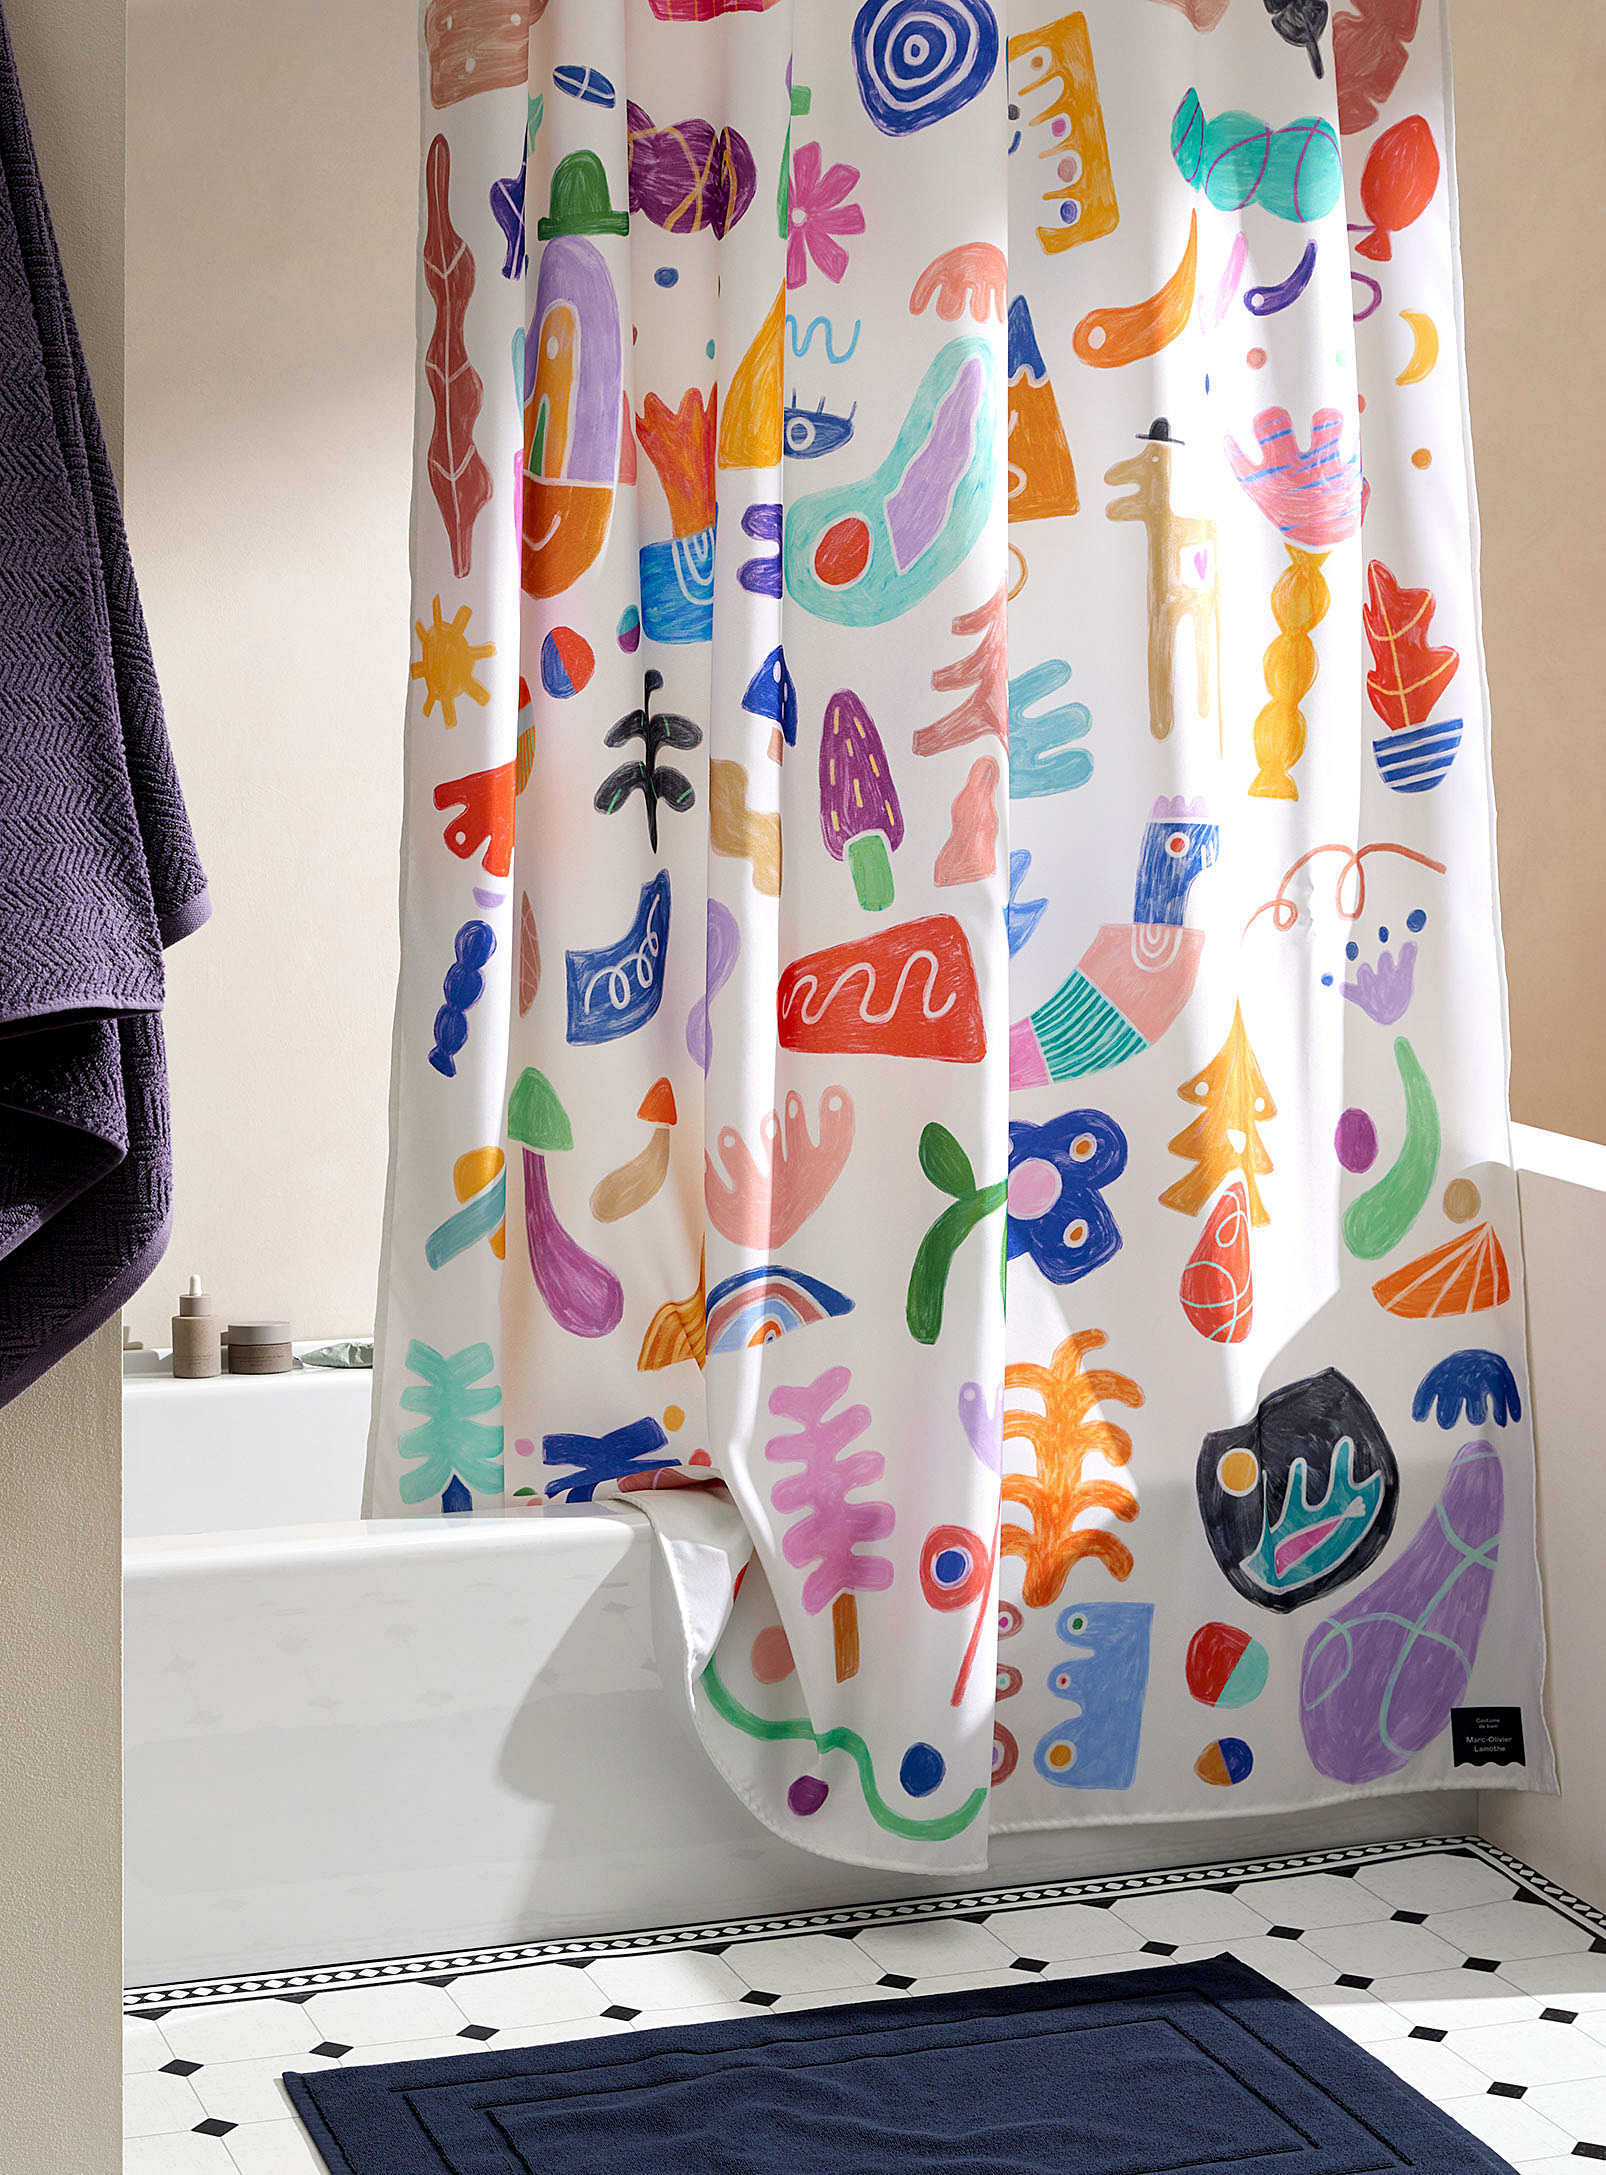 Costume De Bain I Am Everything Shower Curtain In Collaboration With Artist Marc-oliver Lamothe In White